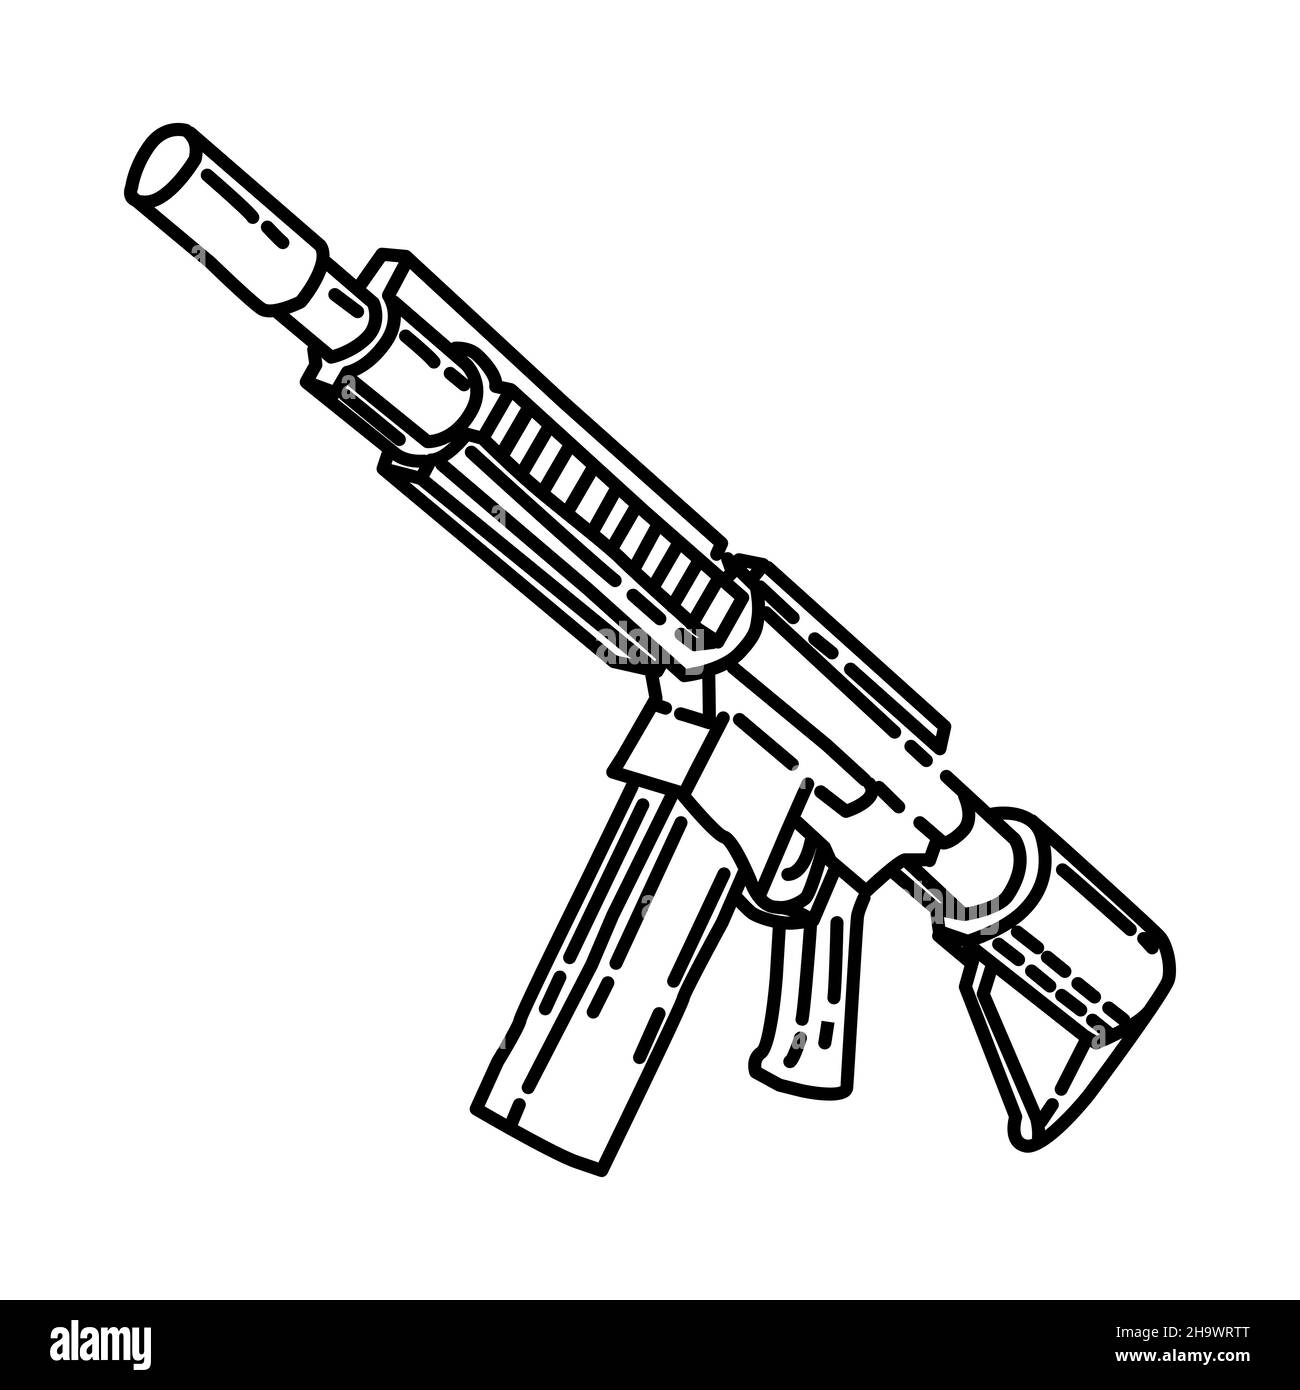 Marine Corp Carbine Rifle Part of Military and Marine Corps Equipments Hand Drawn Icon Set Vector Stock Vector